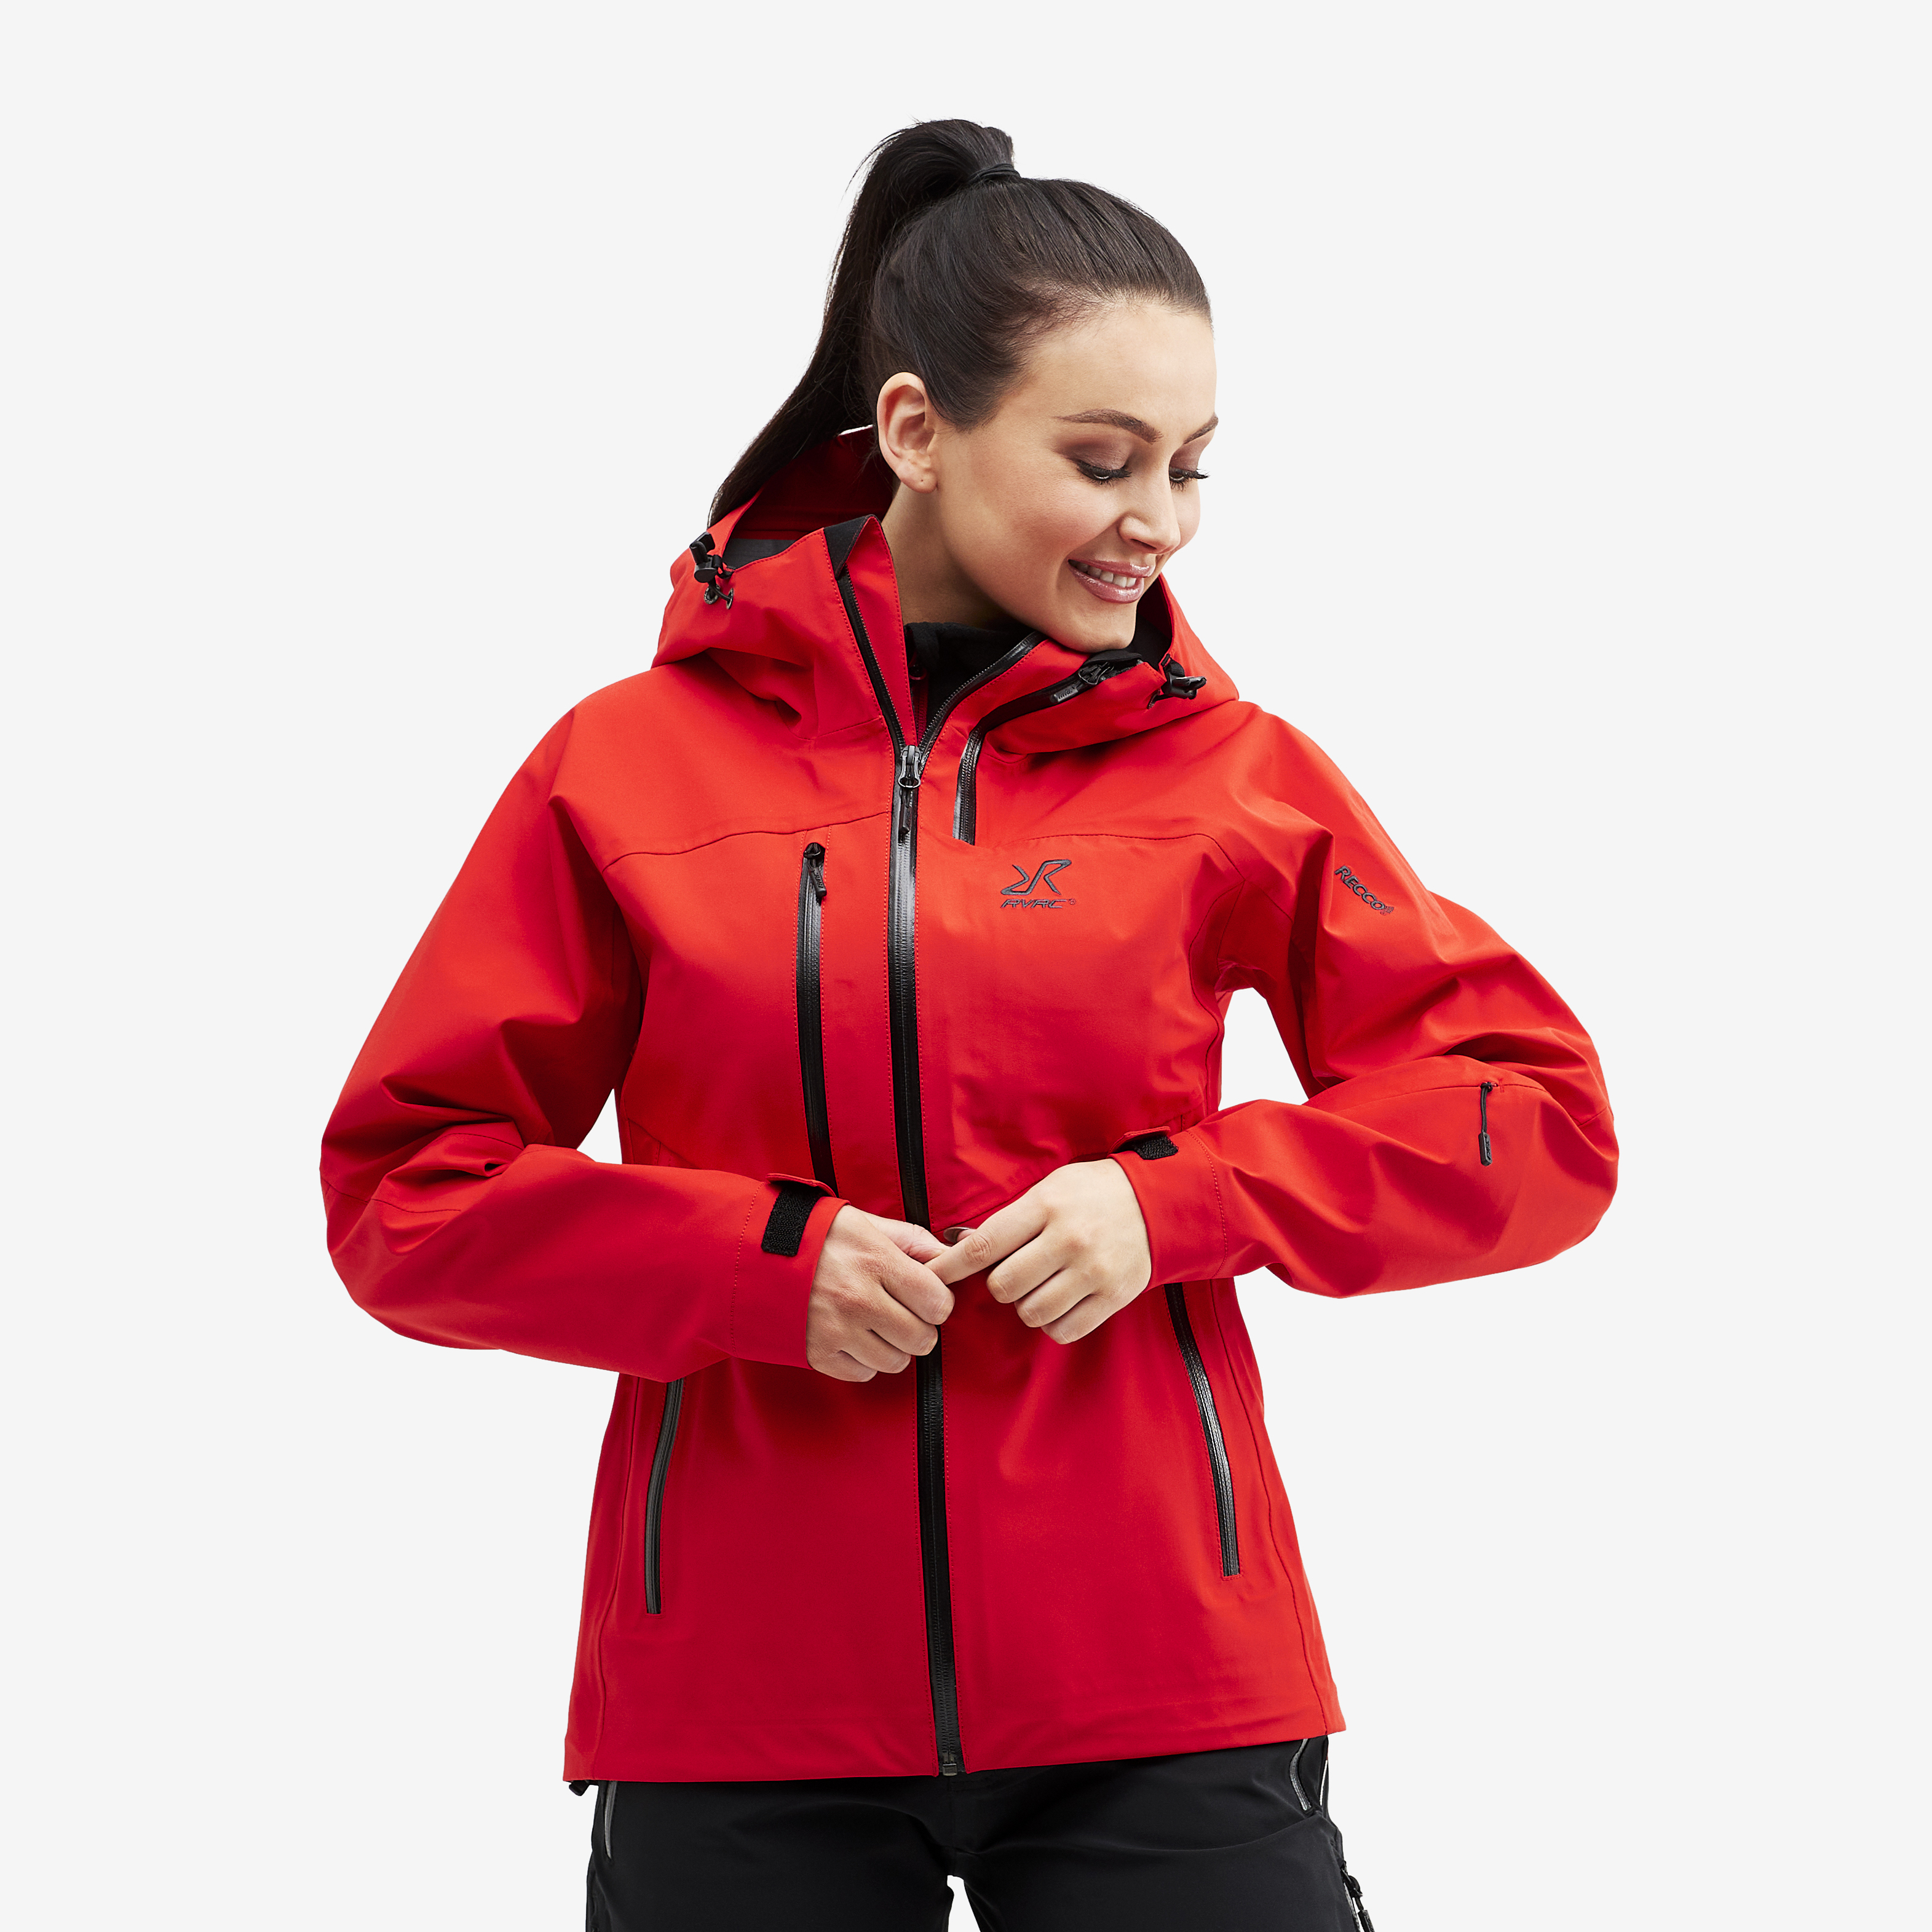 Cyclone Rescue Jacket 2.0 Flame Scarlet Dame